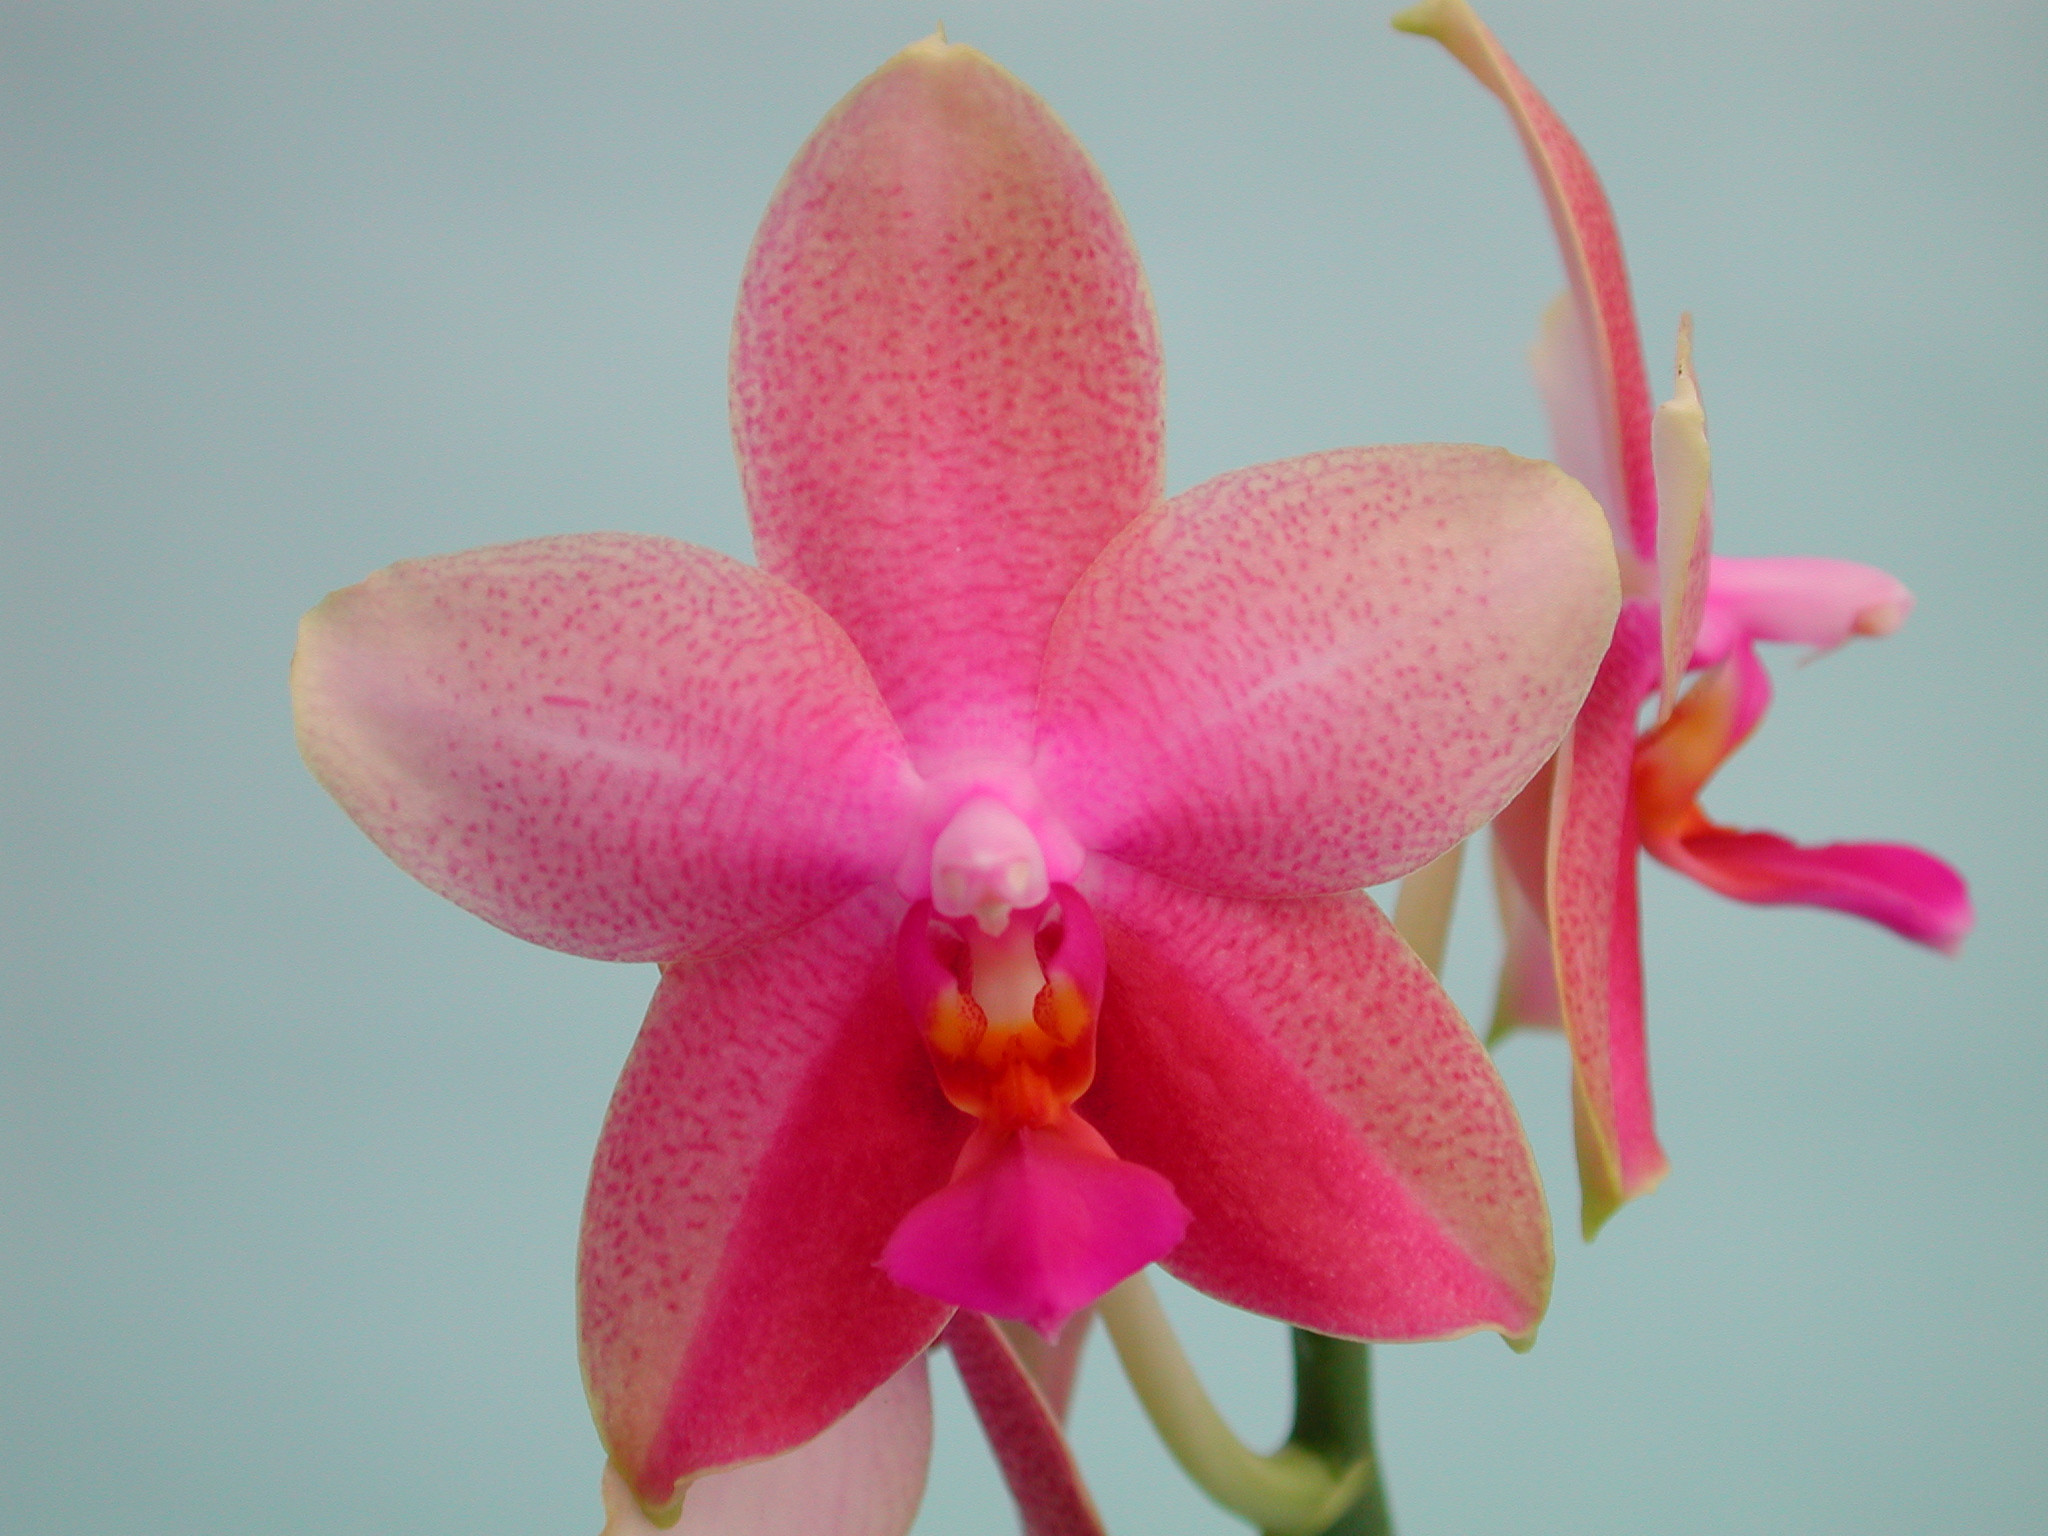 Phalaenopsis Liodoro (2 Rispenansätze) | Orchideen-Wichmann.de - Highest  horticultural quality and experience since 1897